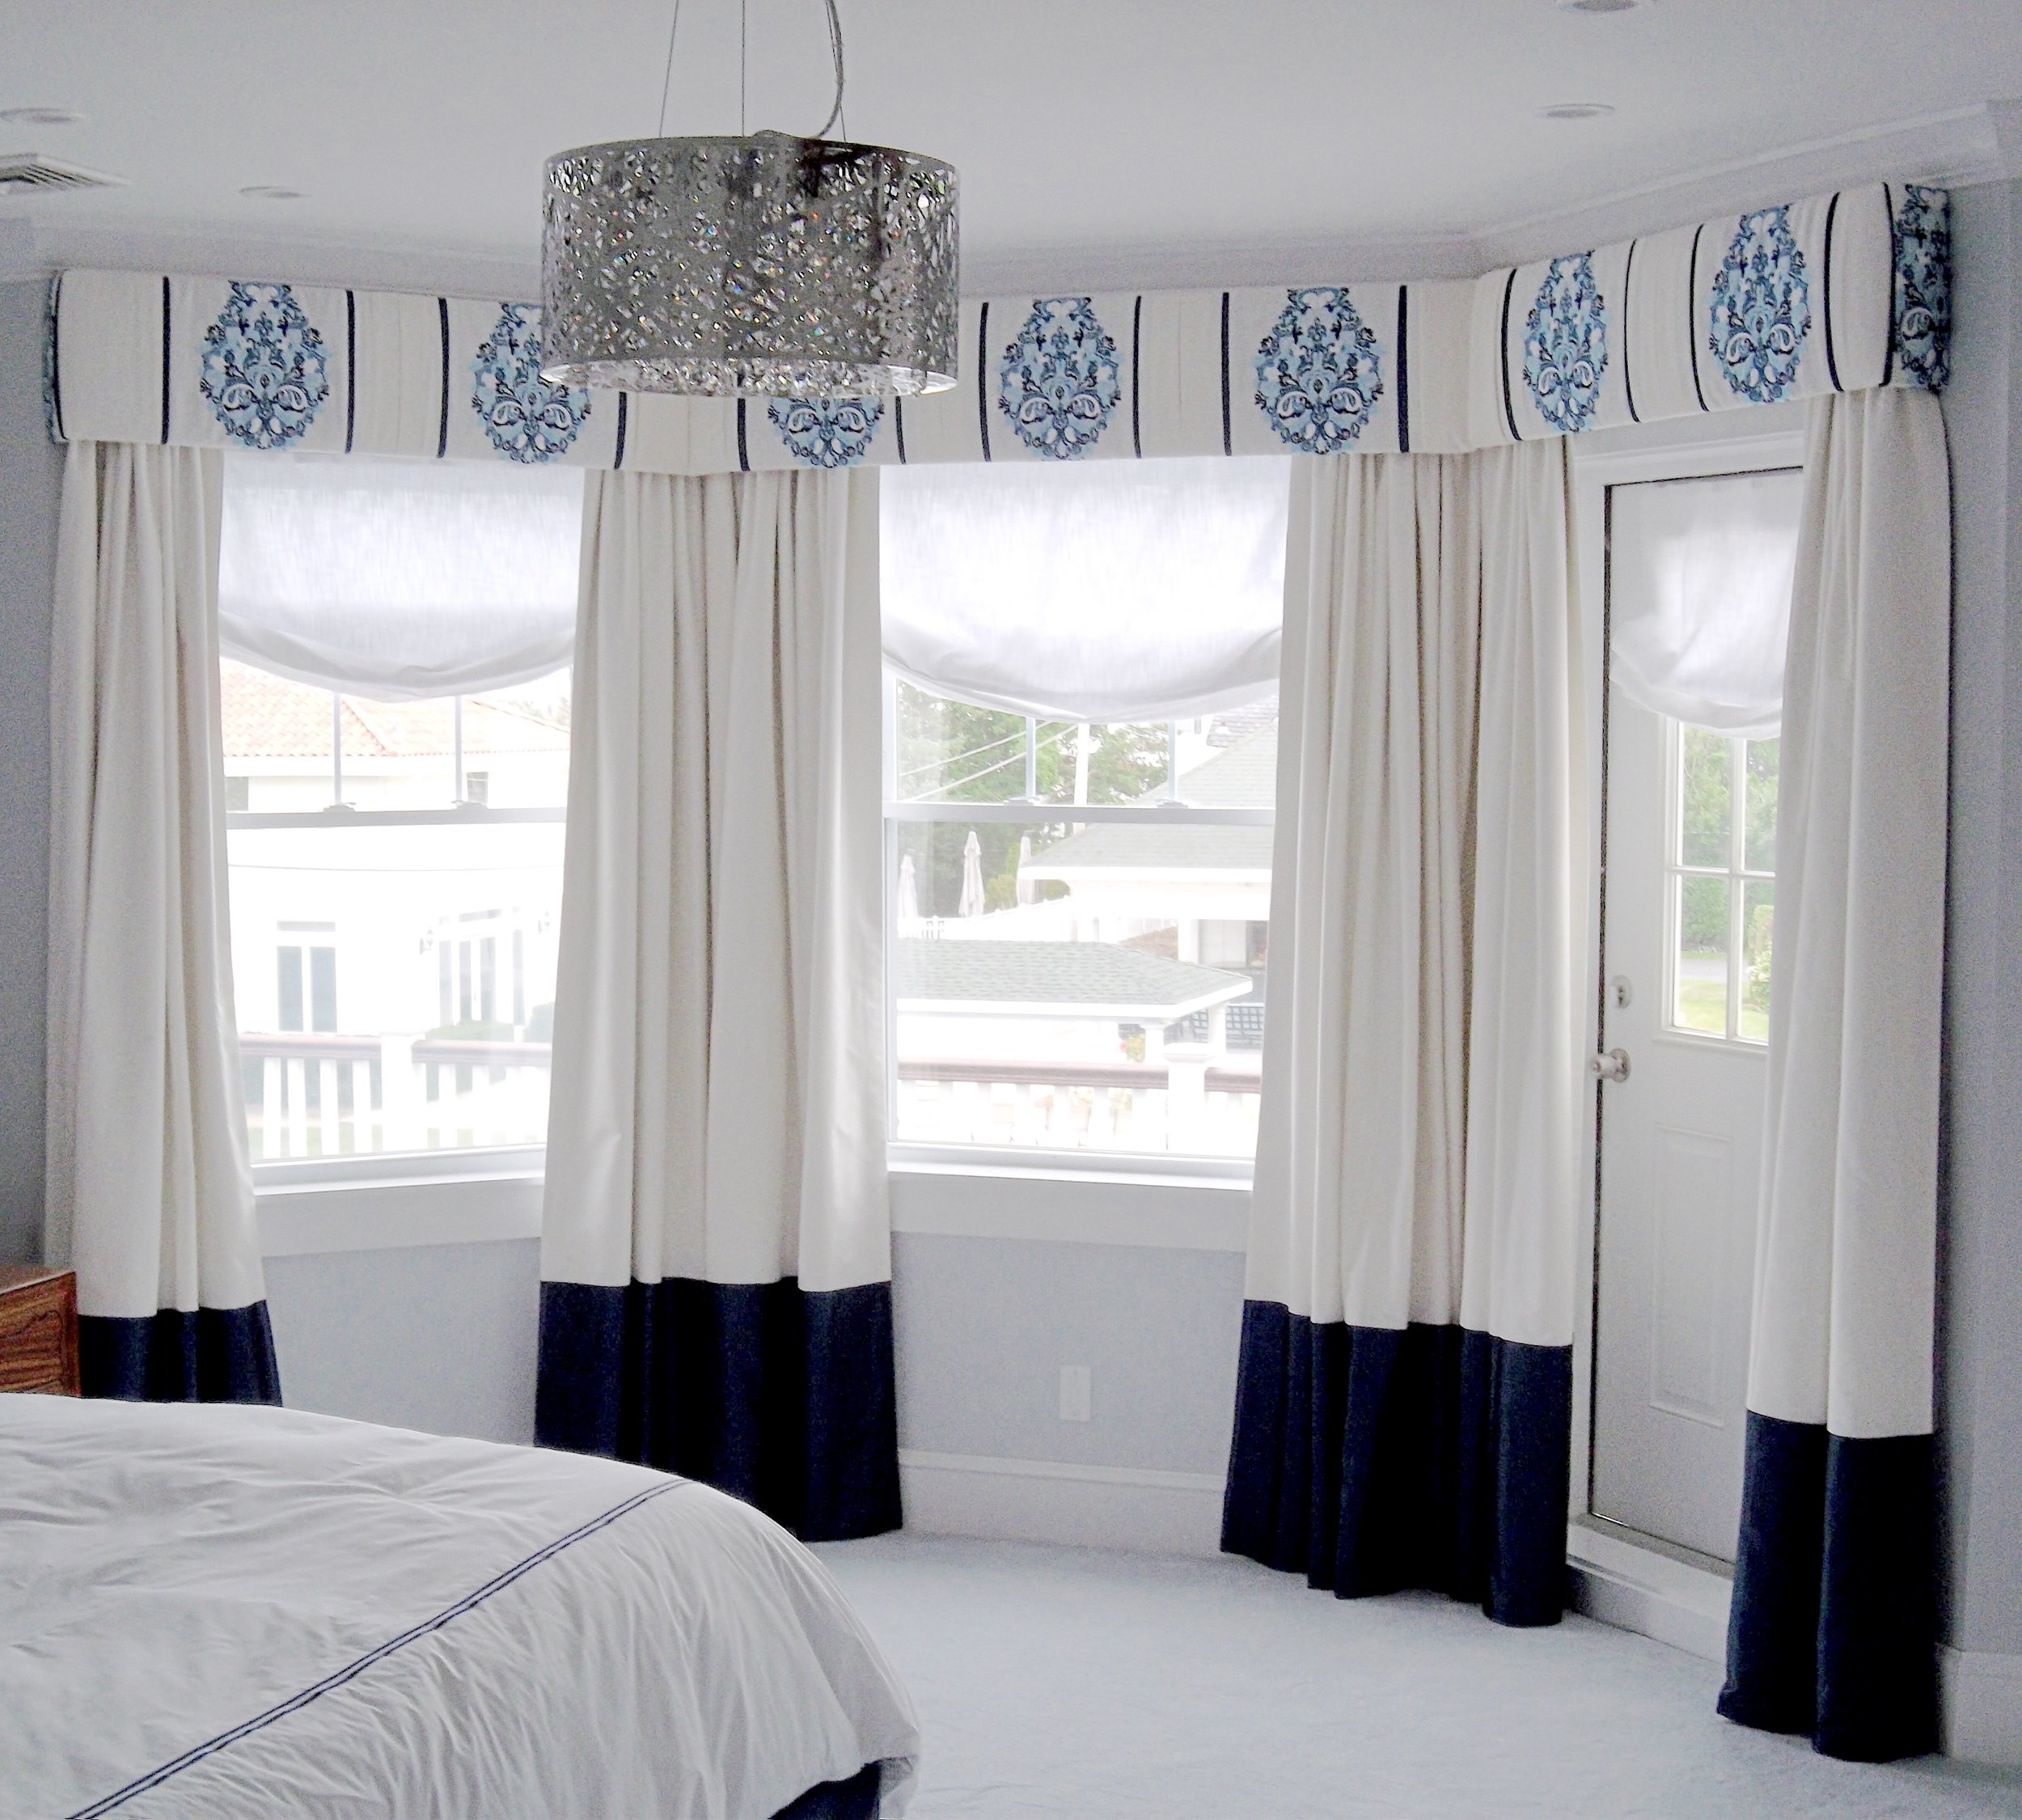  Curtains and Upholstered Valance  